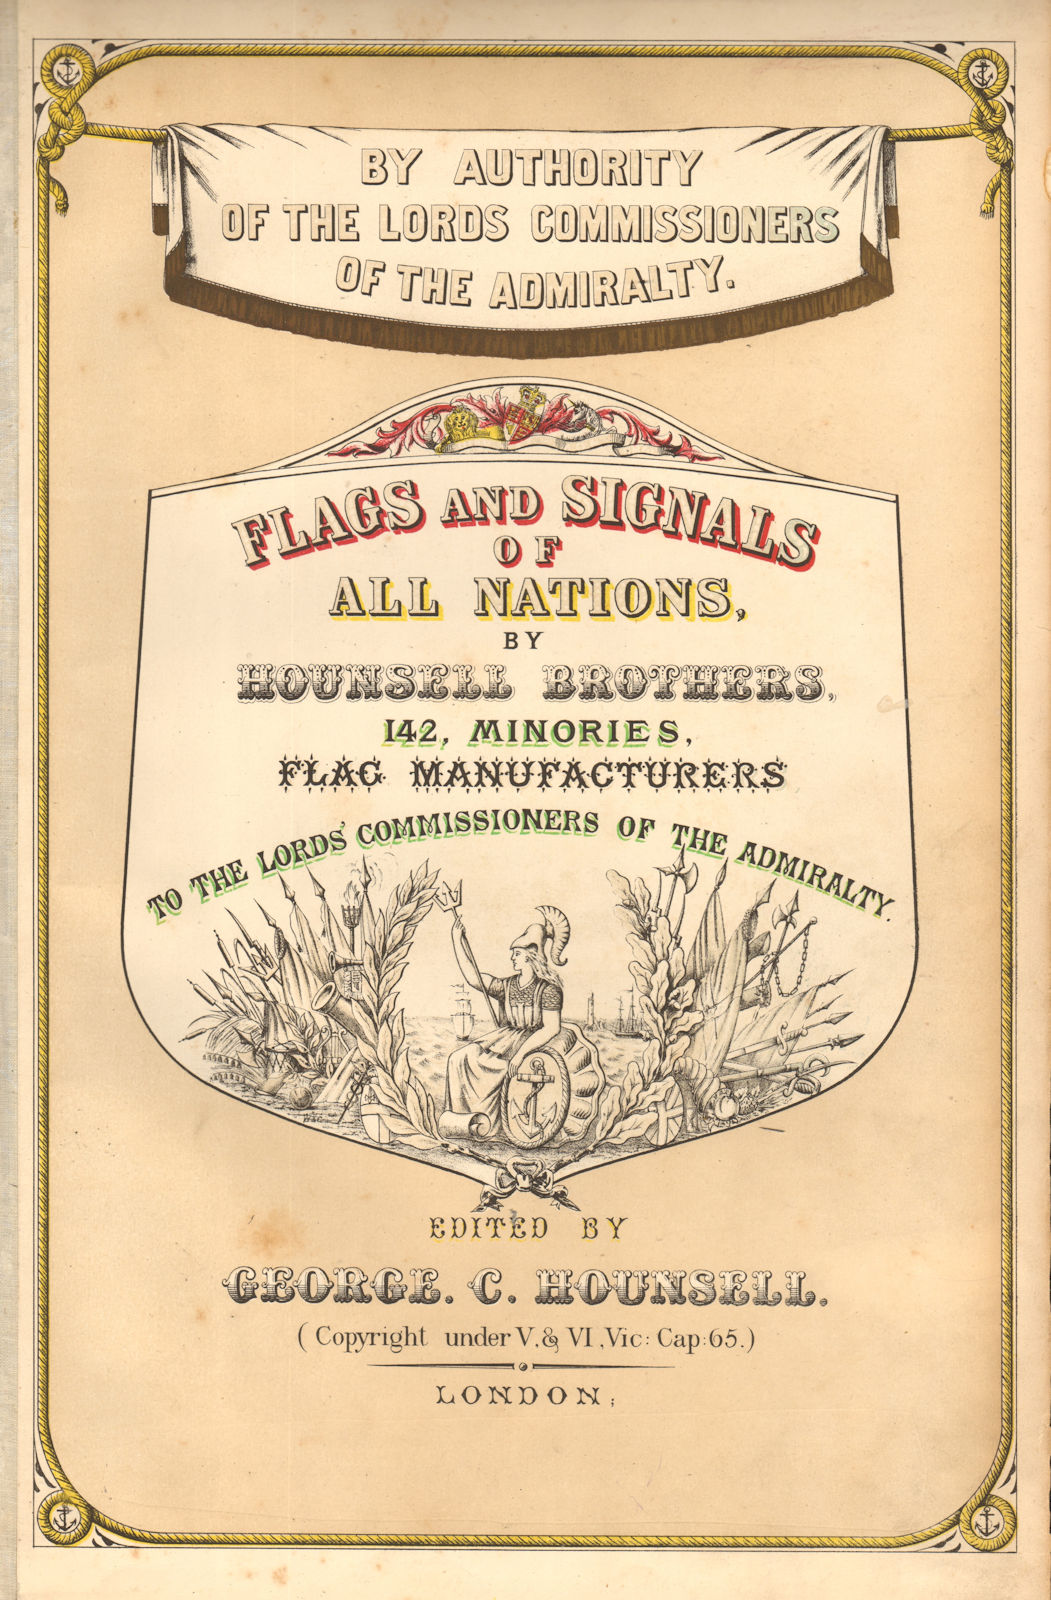 Associate Product Hounsell's "Flags and Signals of All Nations". Decorative Title Page 1873